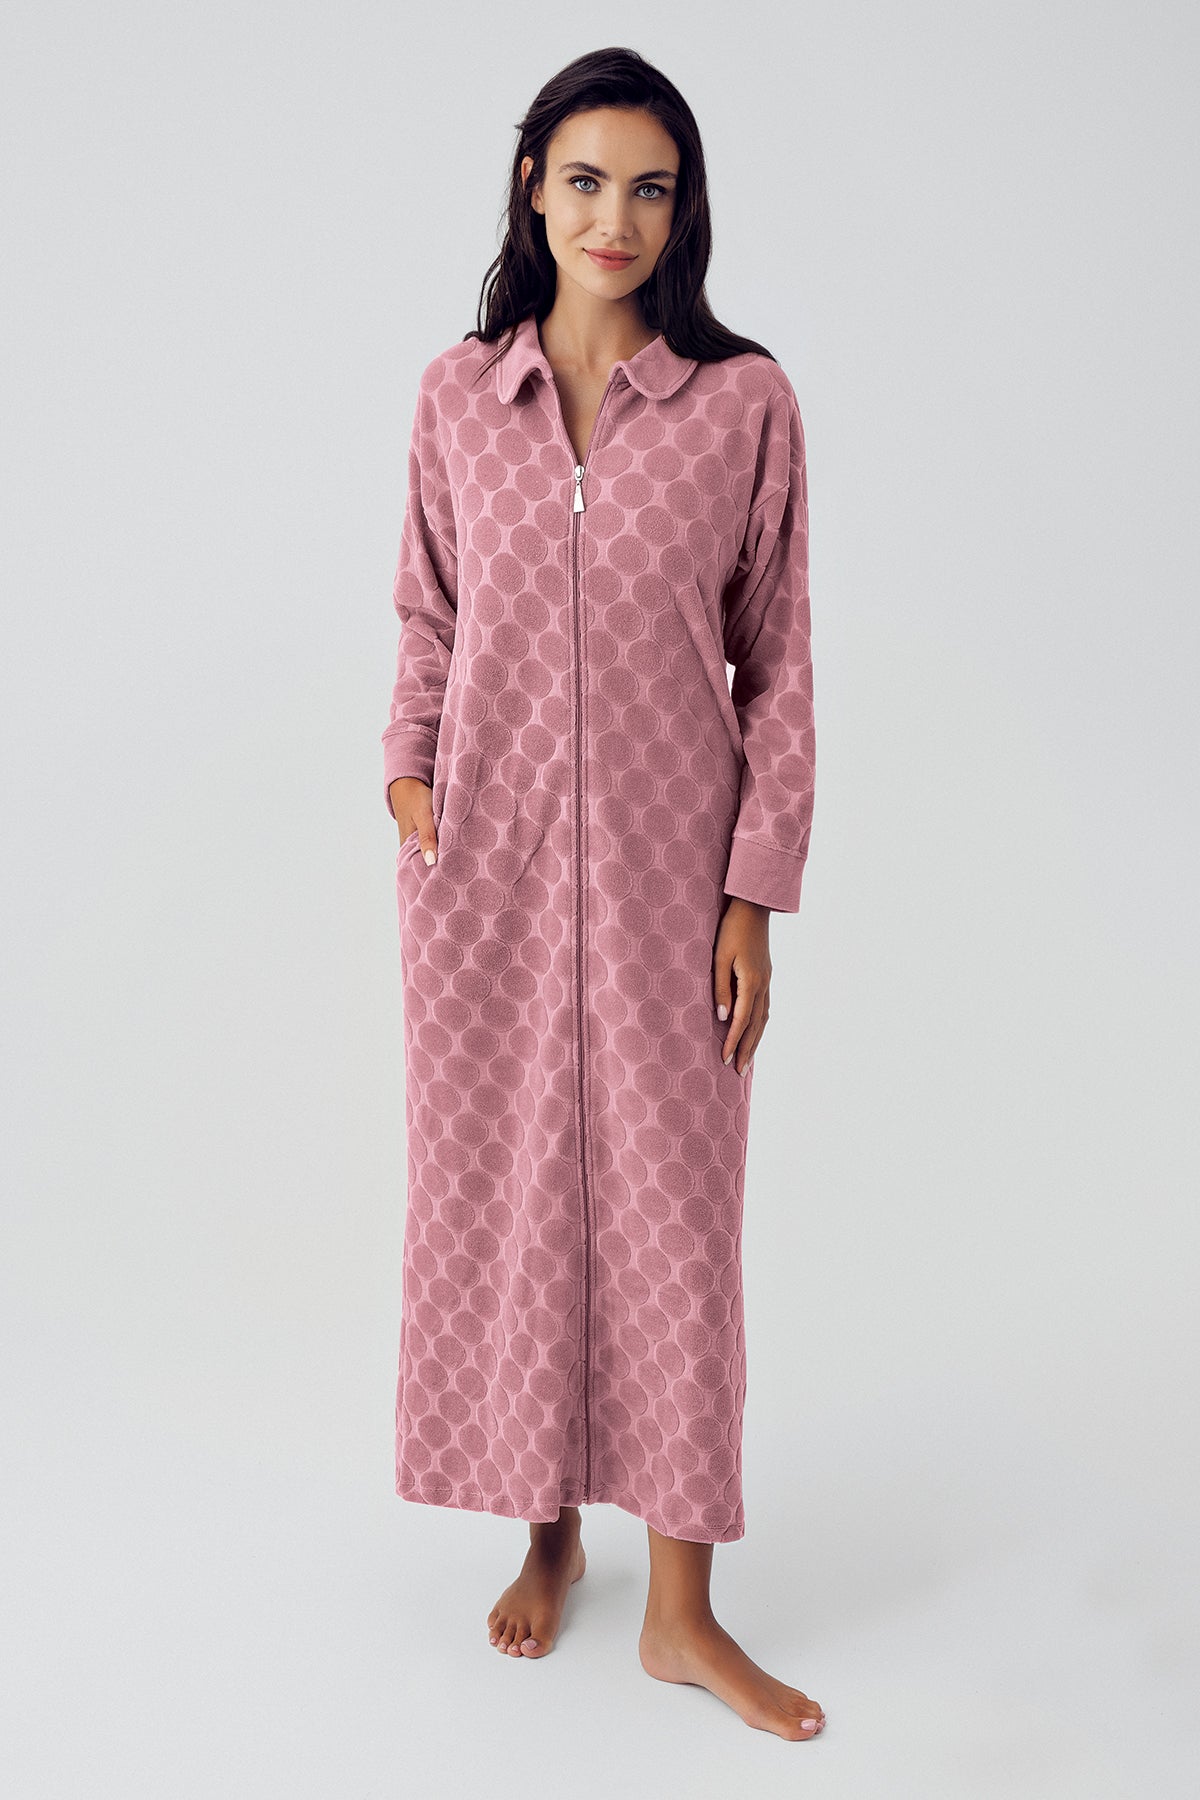 Shopymommy 15100 Terry Jacquard Maternity & Nursing Nightgown Dried Rose